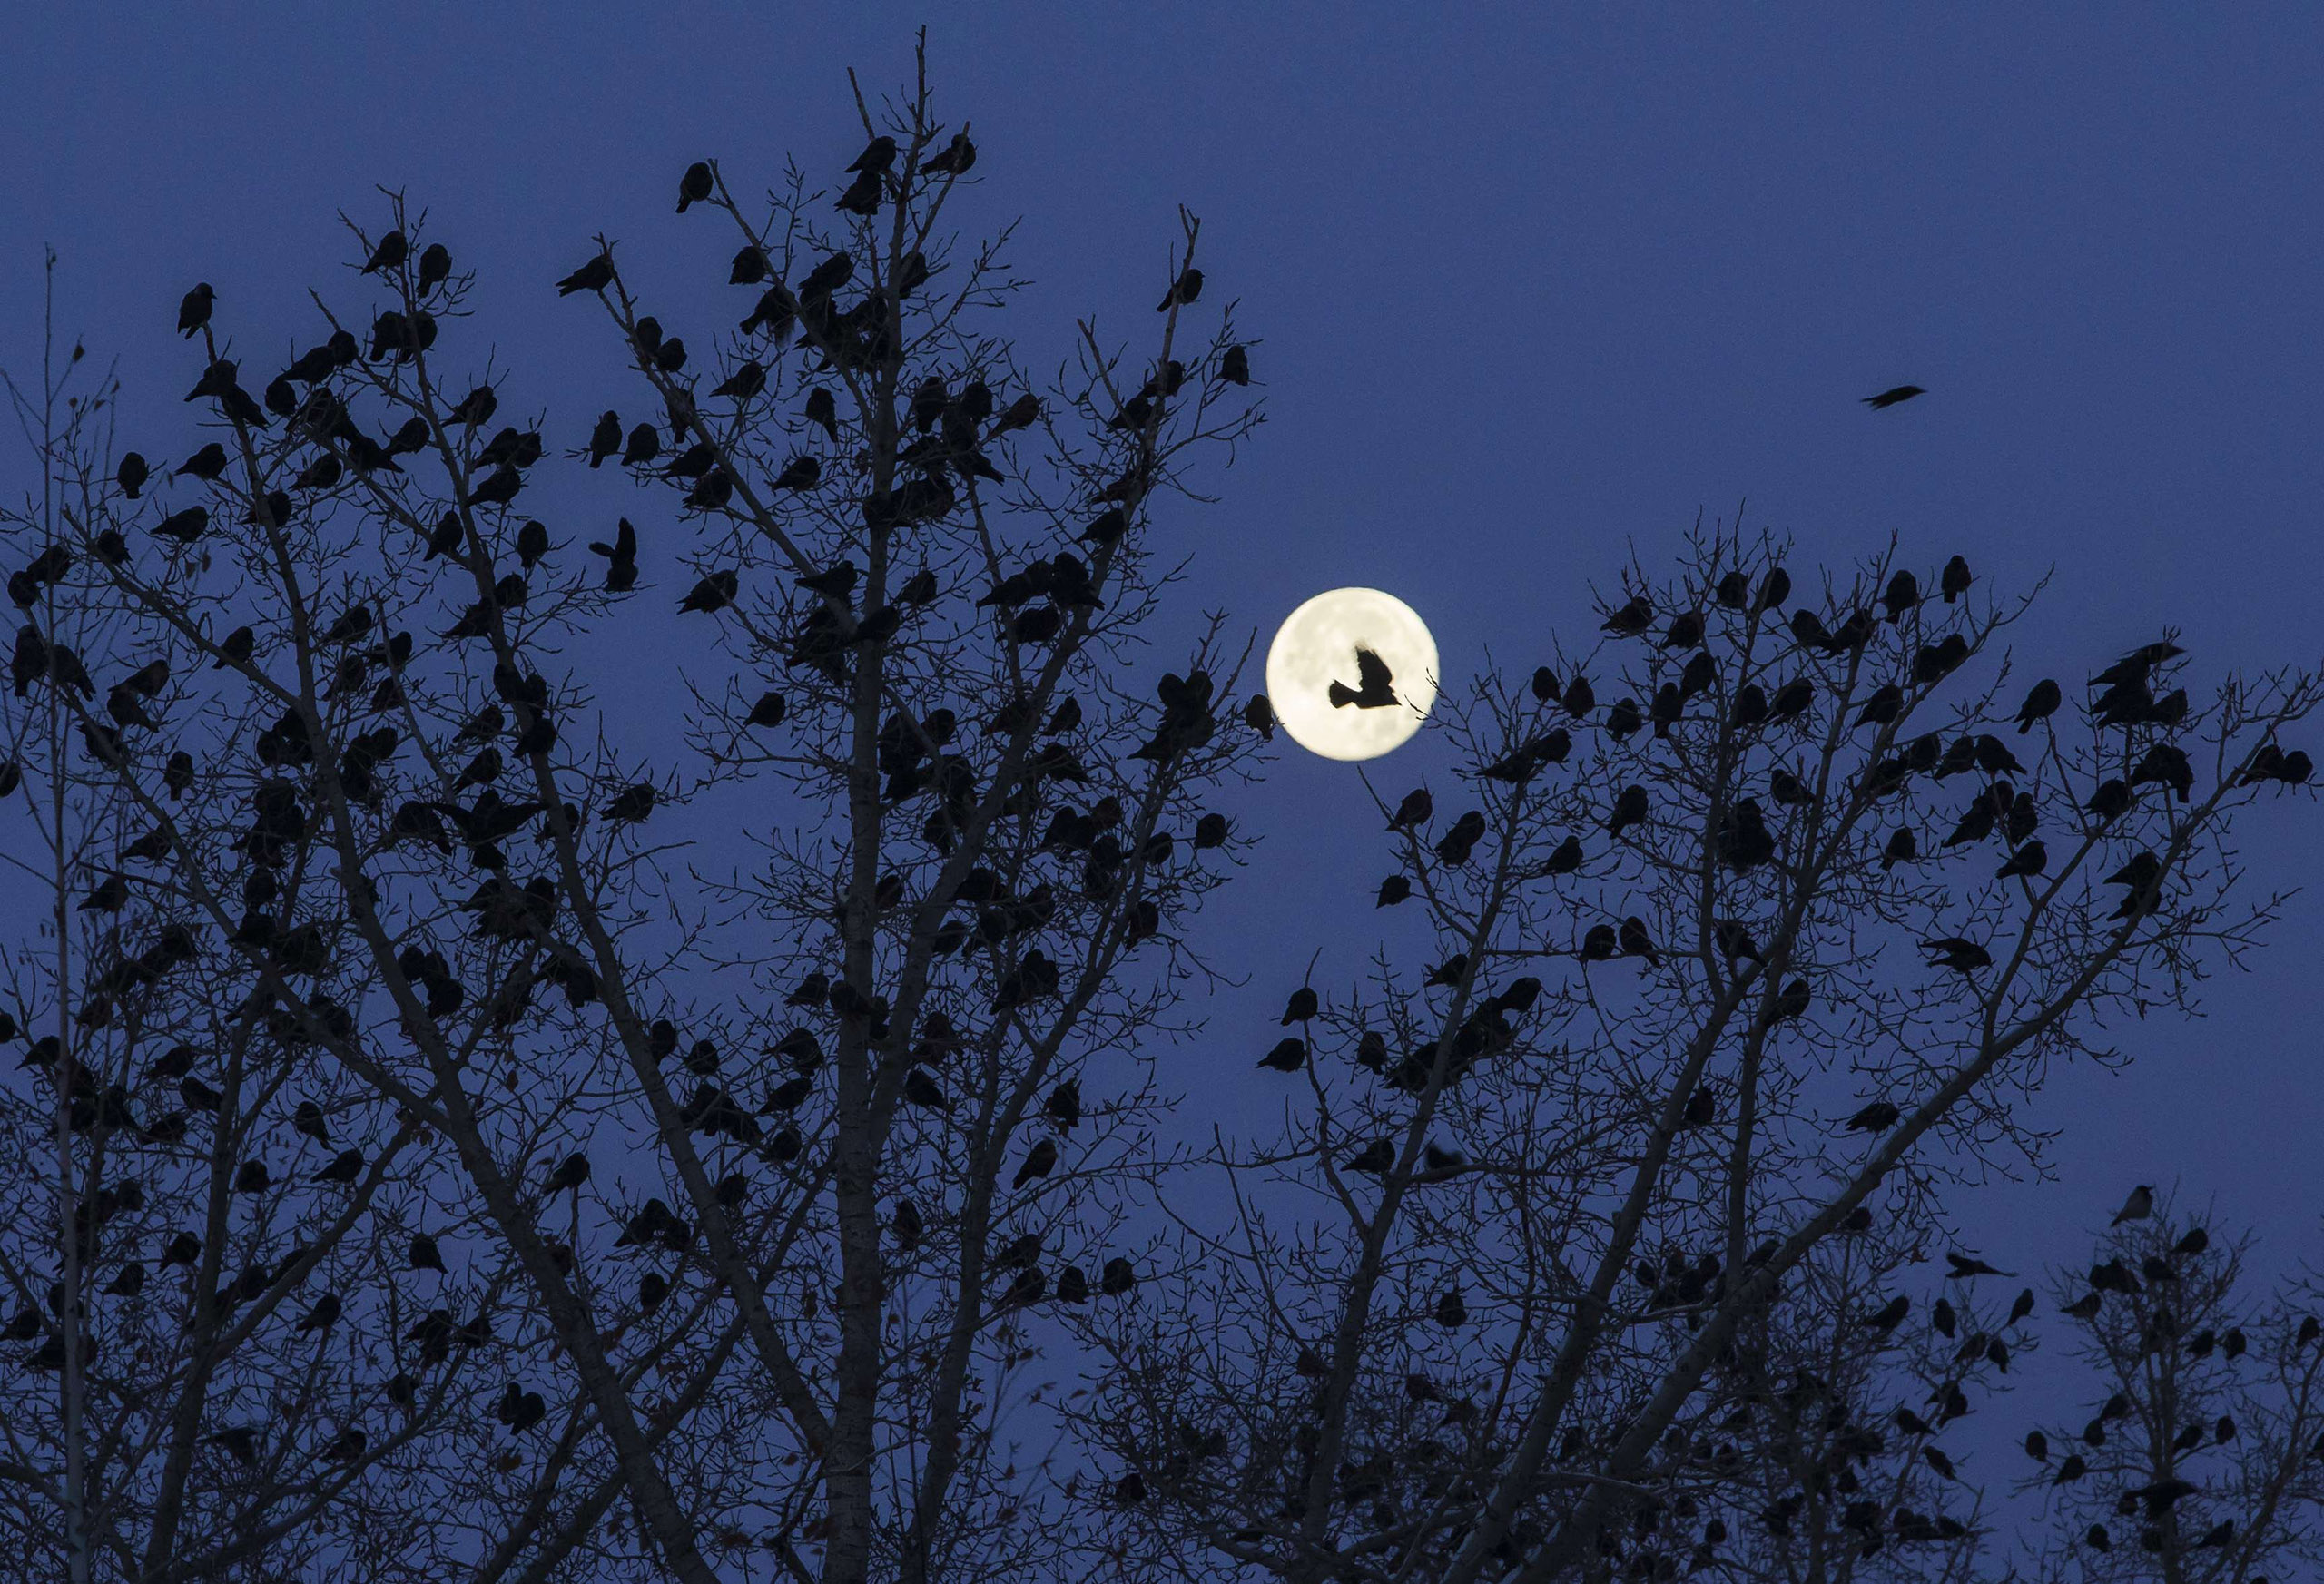 A flock of birds are seen on a tree against the moon in Kostanay, northern Kazakhstan on Nov. 8, 2014.